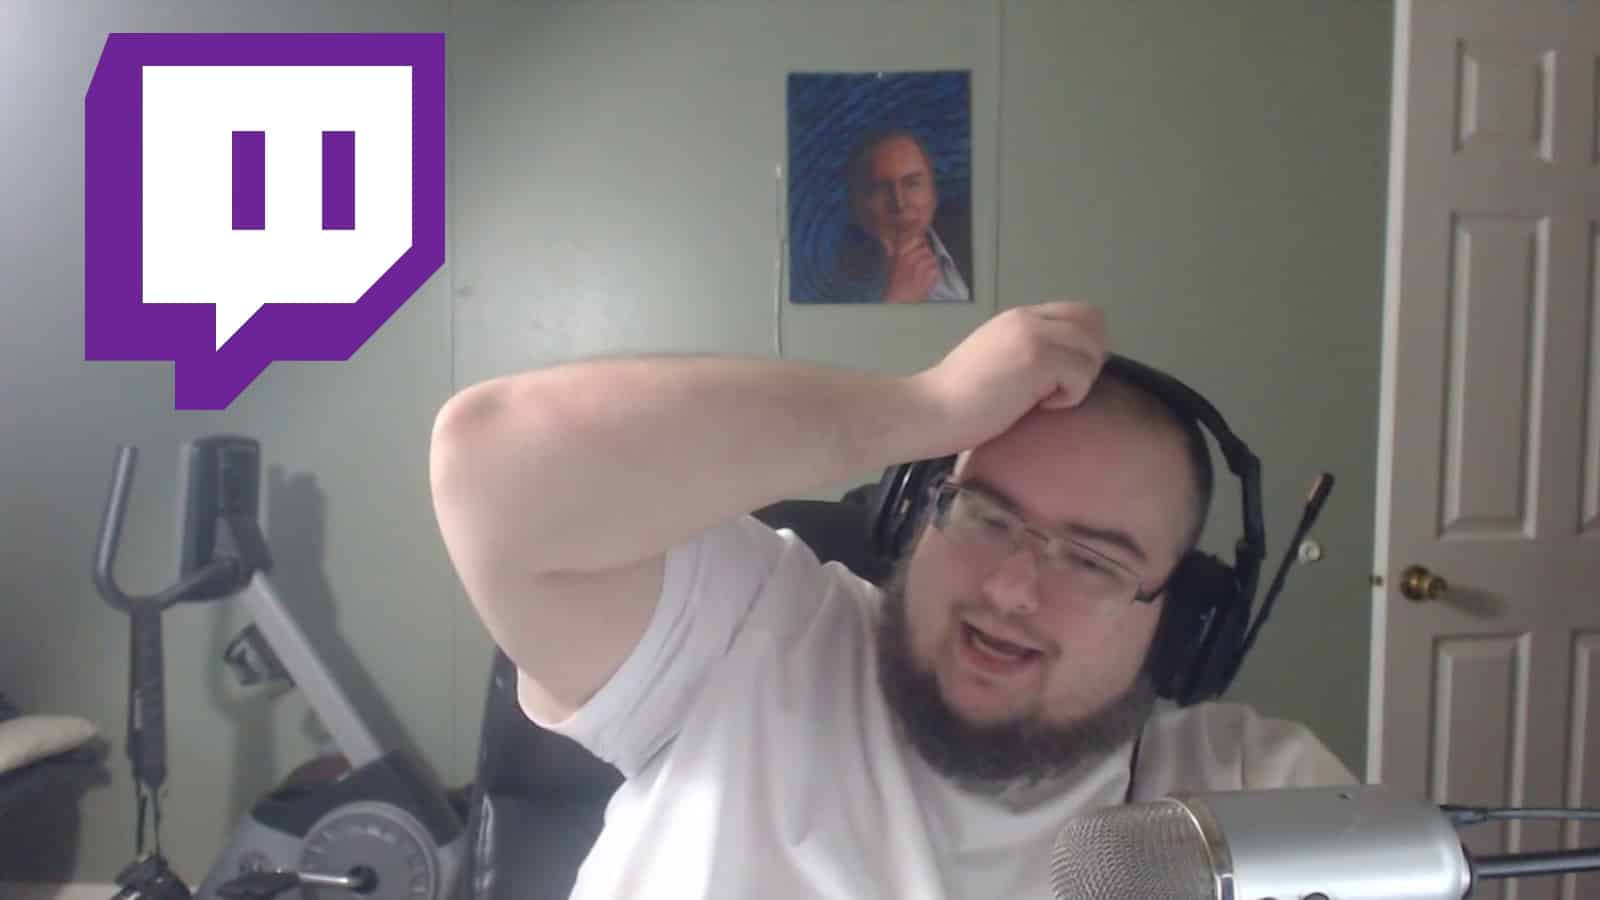 wingsofredemption loses Twitch partnership